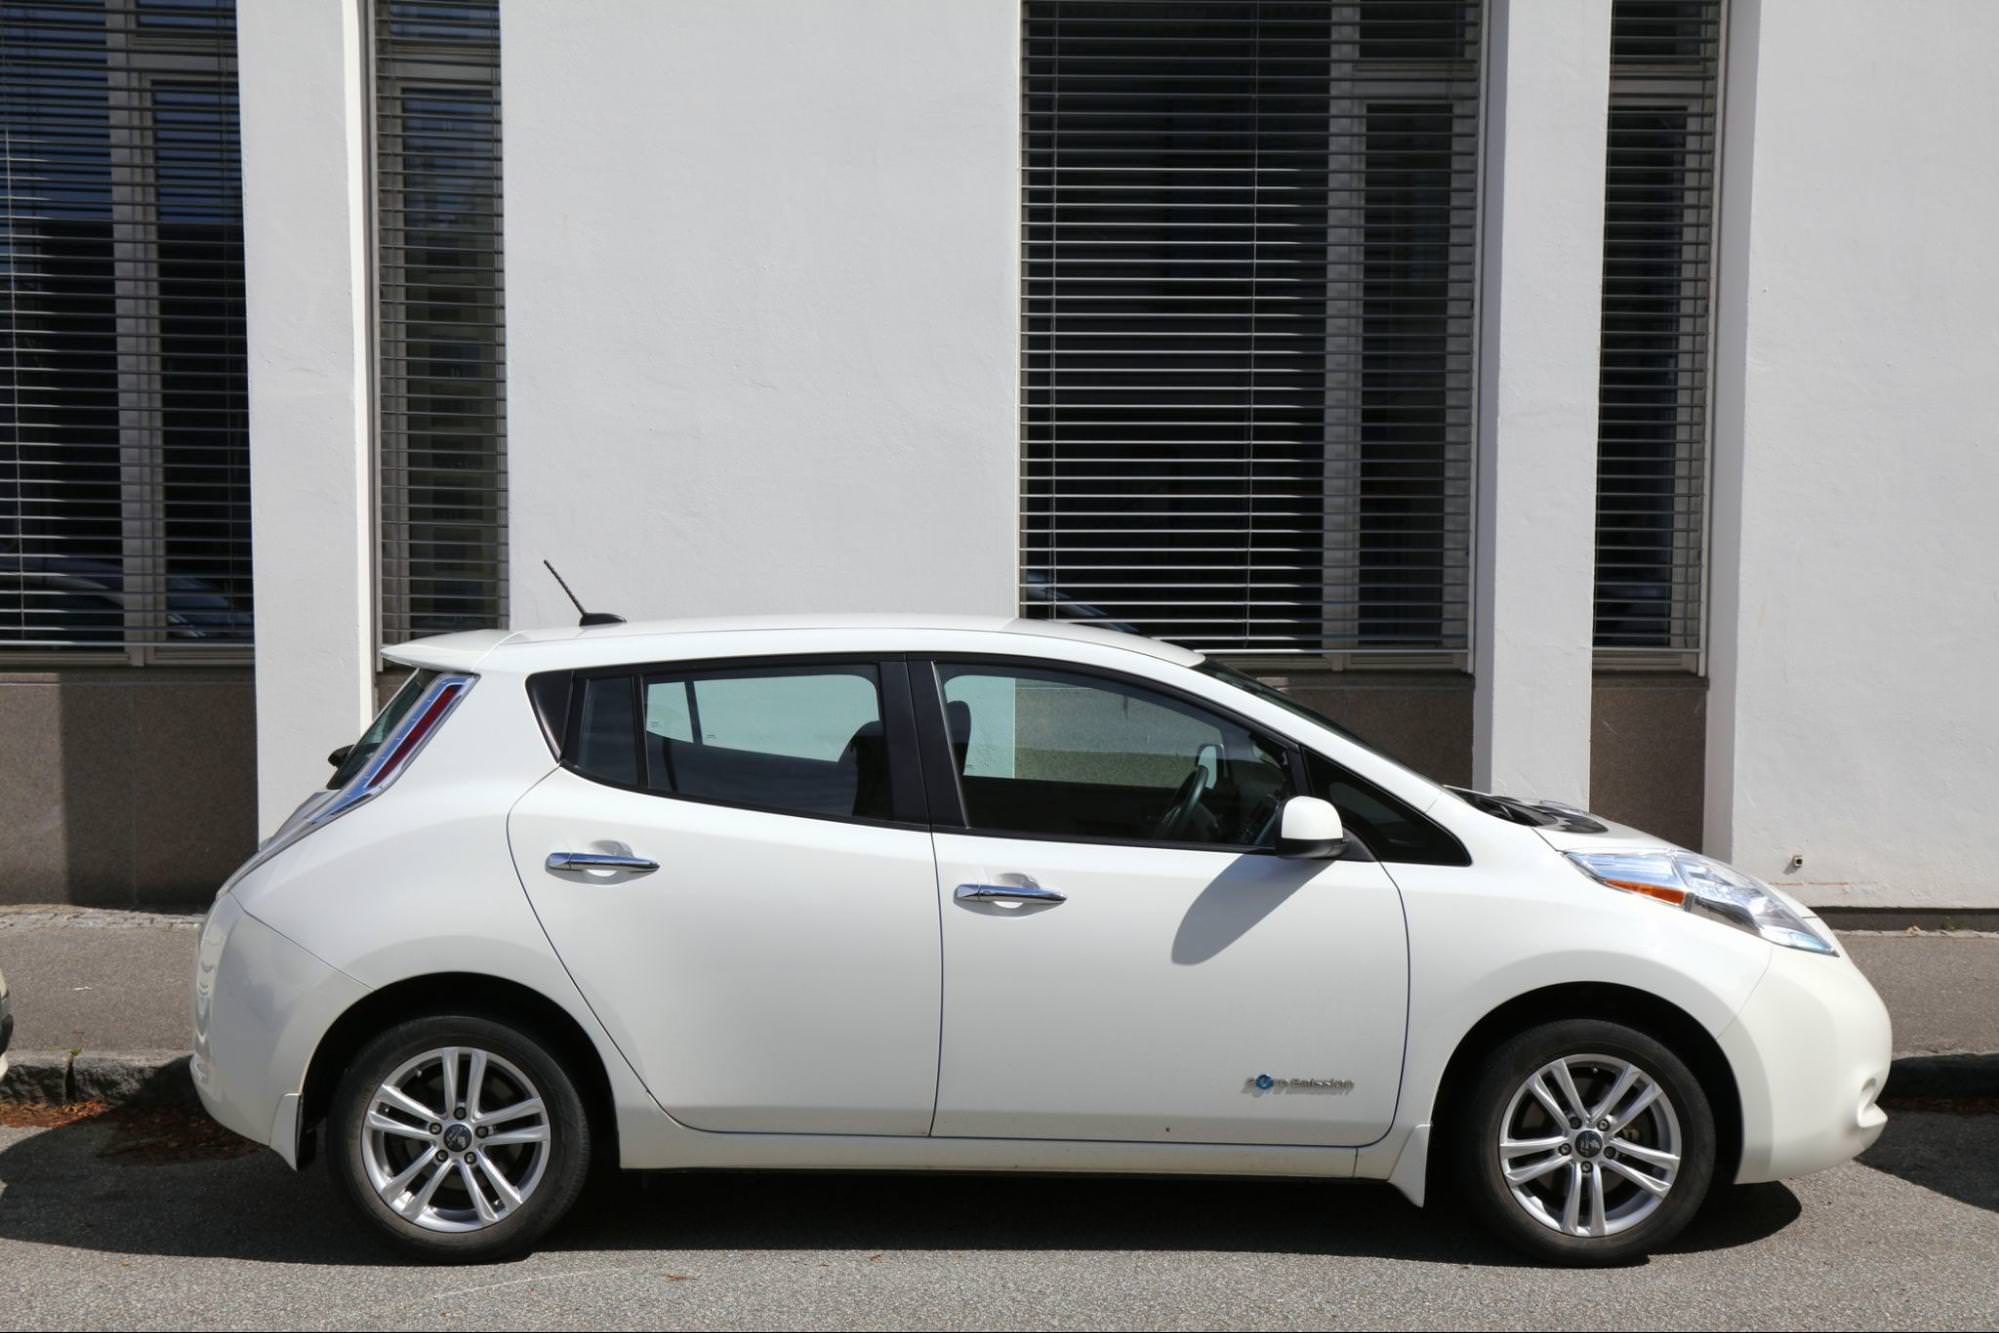 Nissan Leaf zero emissions electric compact car parked on the street